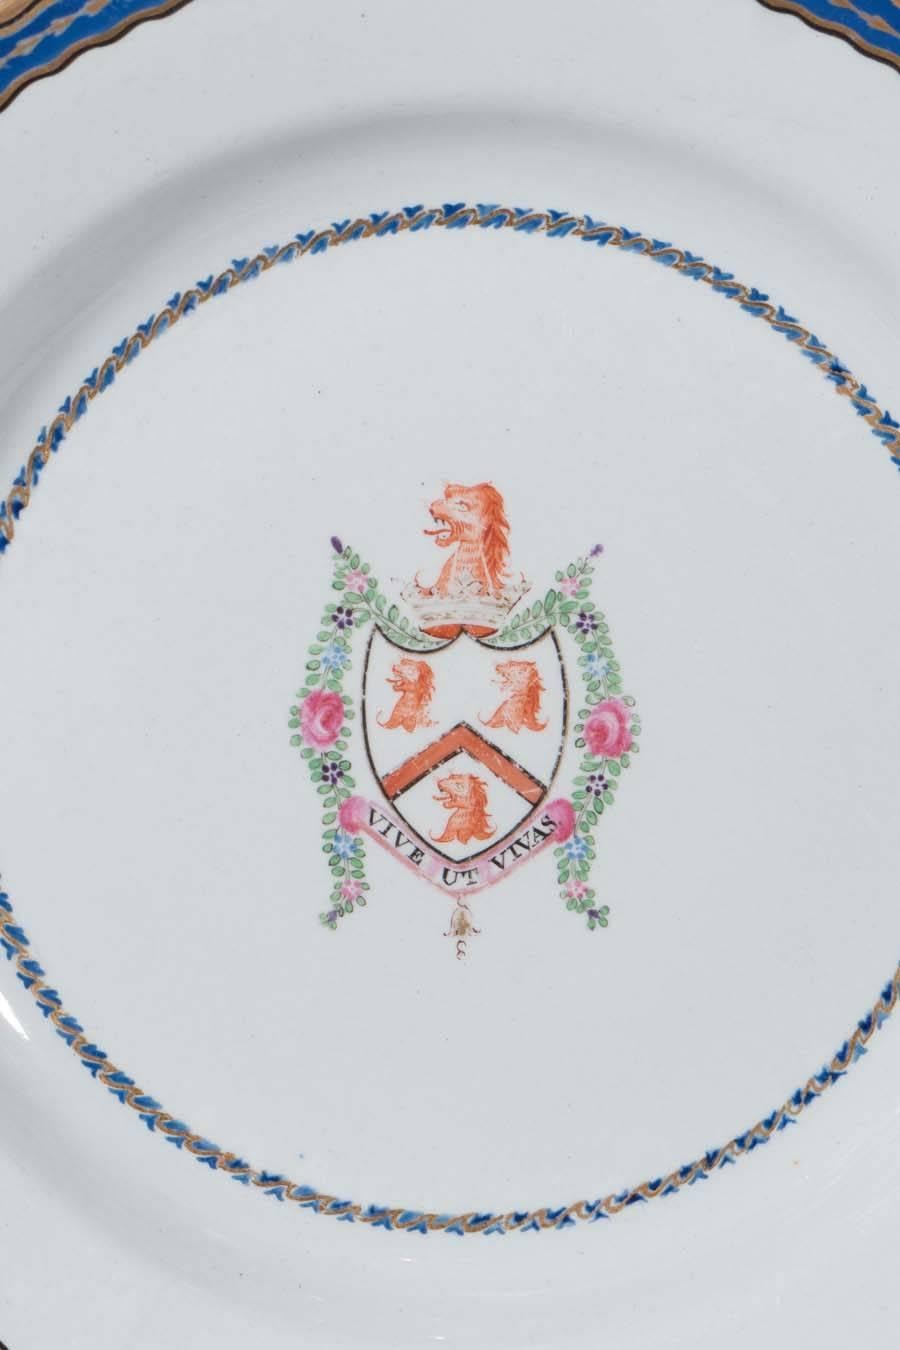 A set of a dozen Spode armorial dishes made in the Chinese Export style, circa 1820. The center features the armorial shield of the Family of Hall displaying
a lion's head erased above a shield with a chevron between three lion's heads erased. The